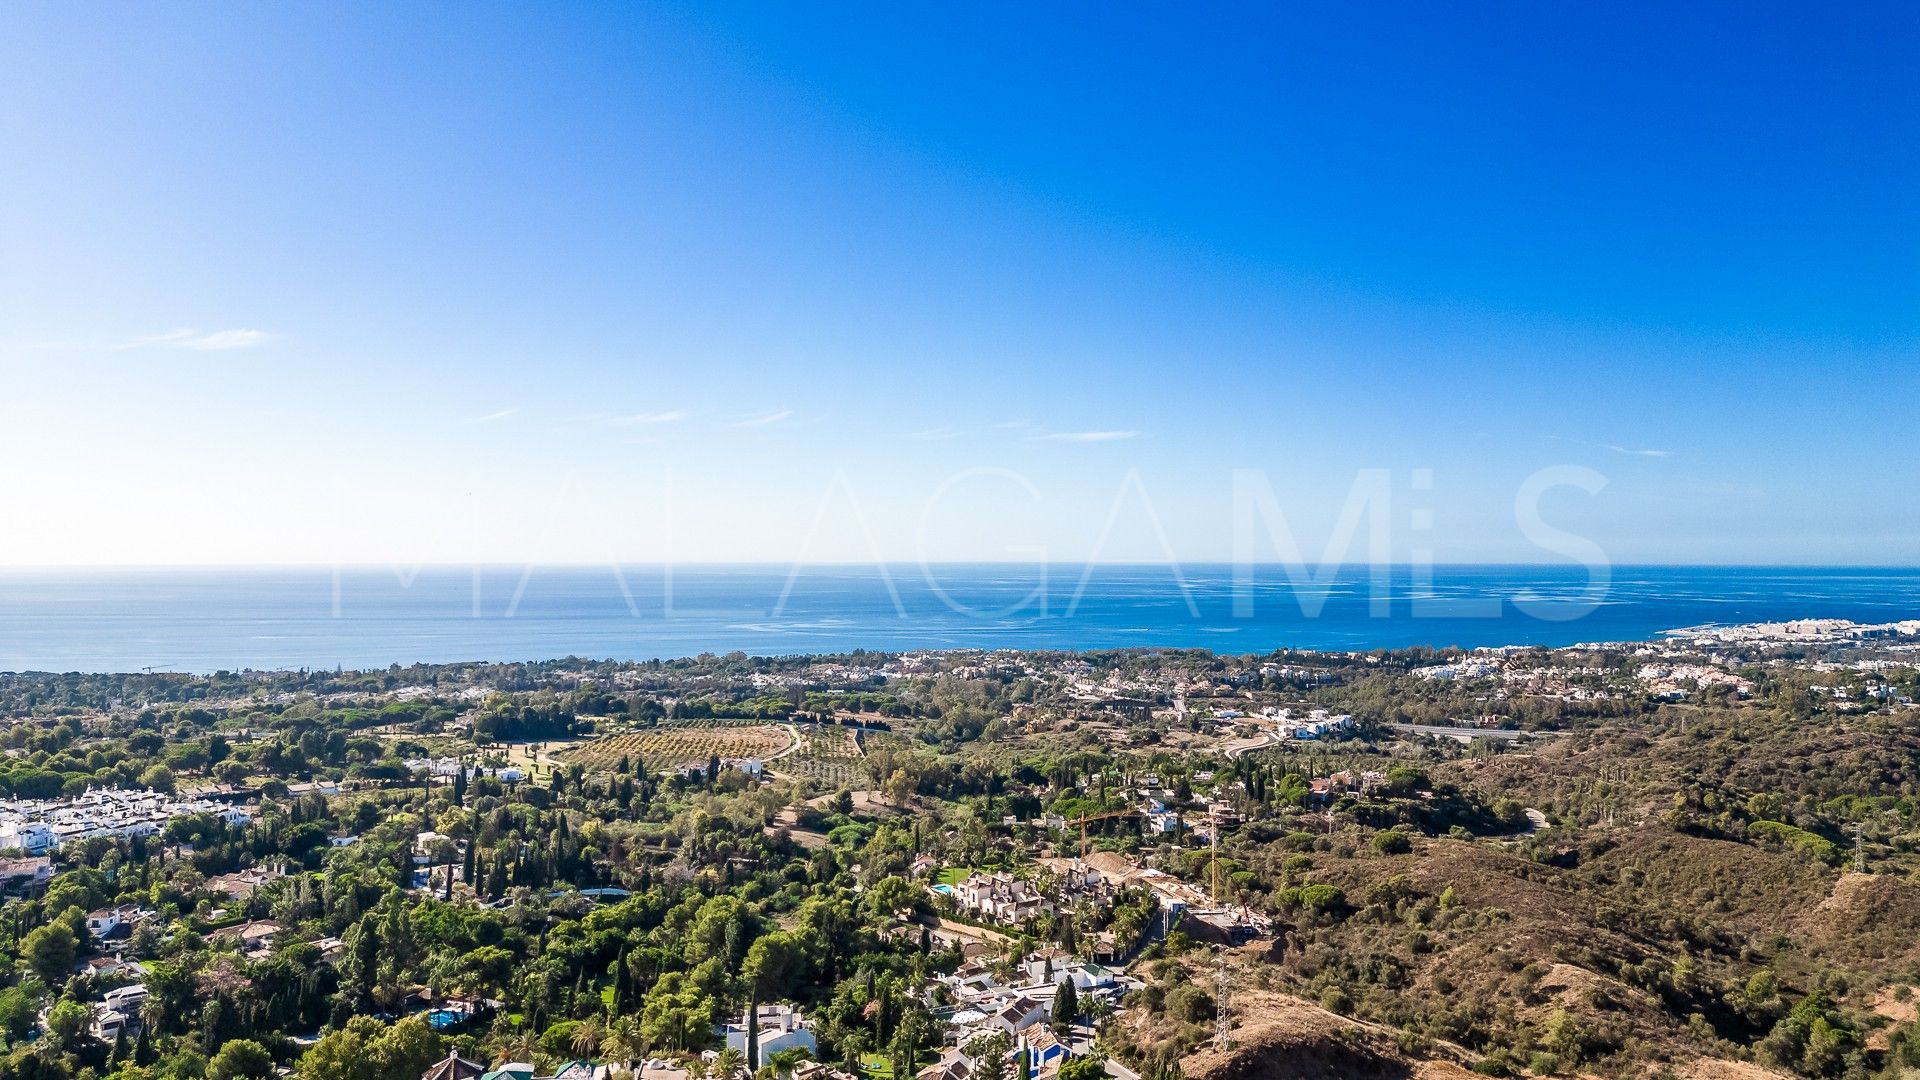 Tomt for sale in Marbella Hill Club